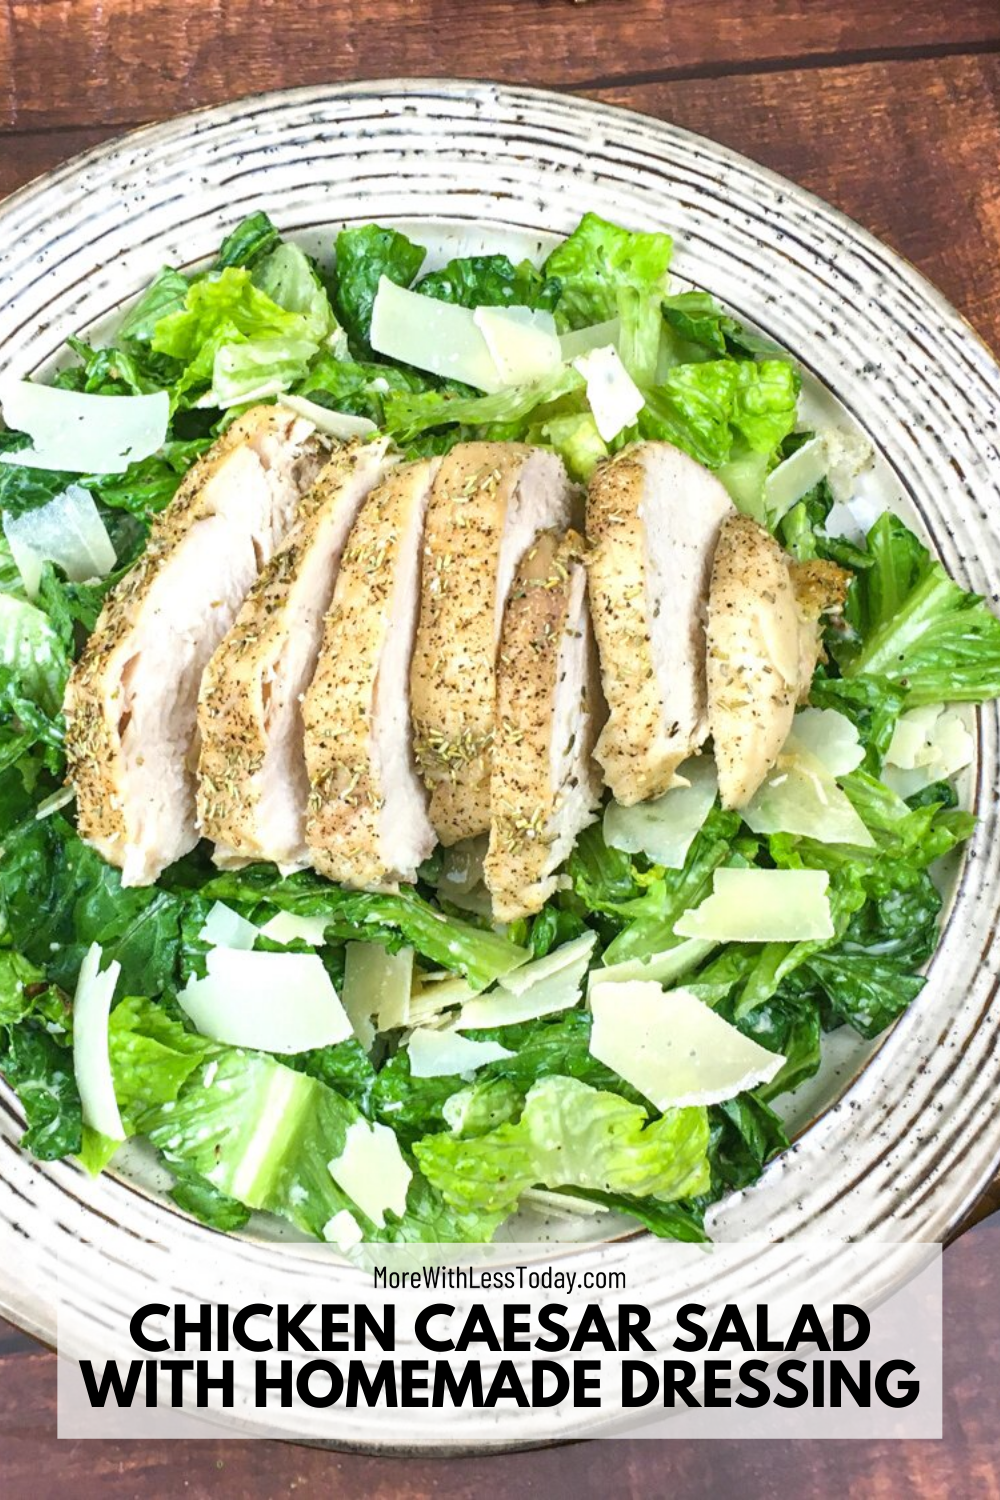 PIN for Chicken Caesar Salad with Homemade Dressing recipe